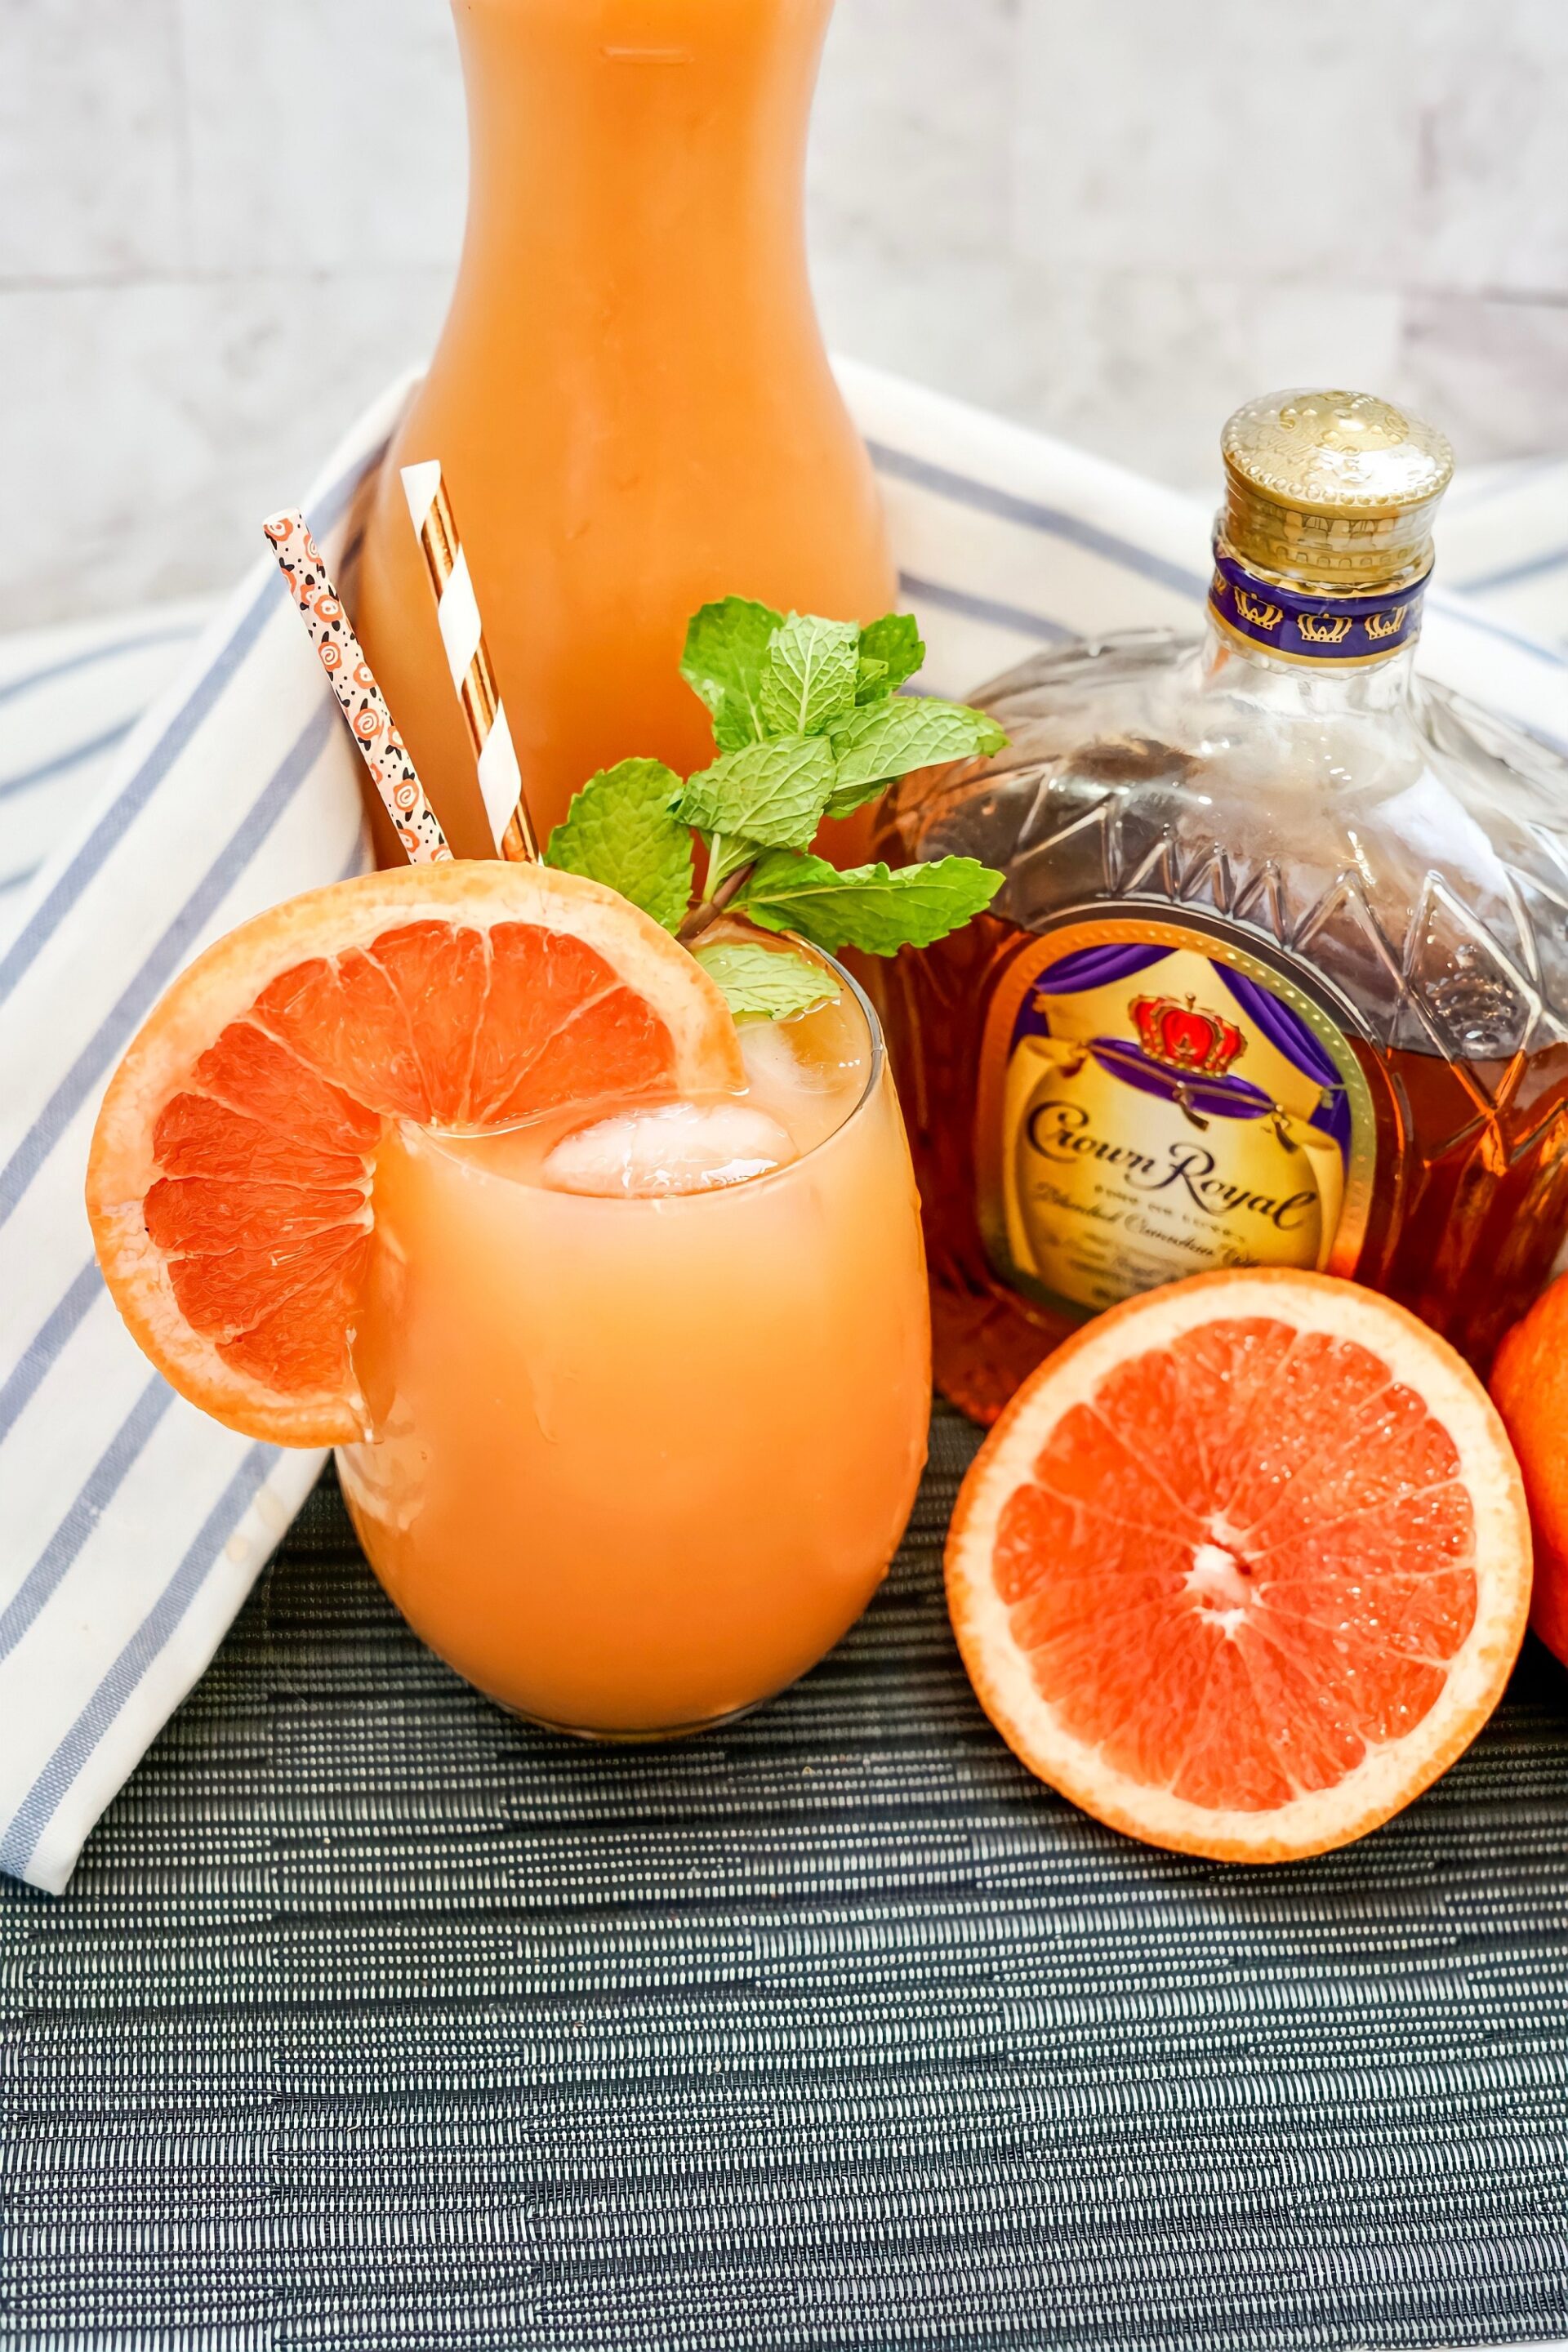 Crown Royal Whiskey Grapefruit Smash in a glass with grapefruit slice garnish and mint.